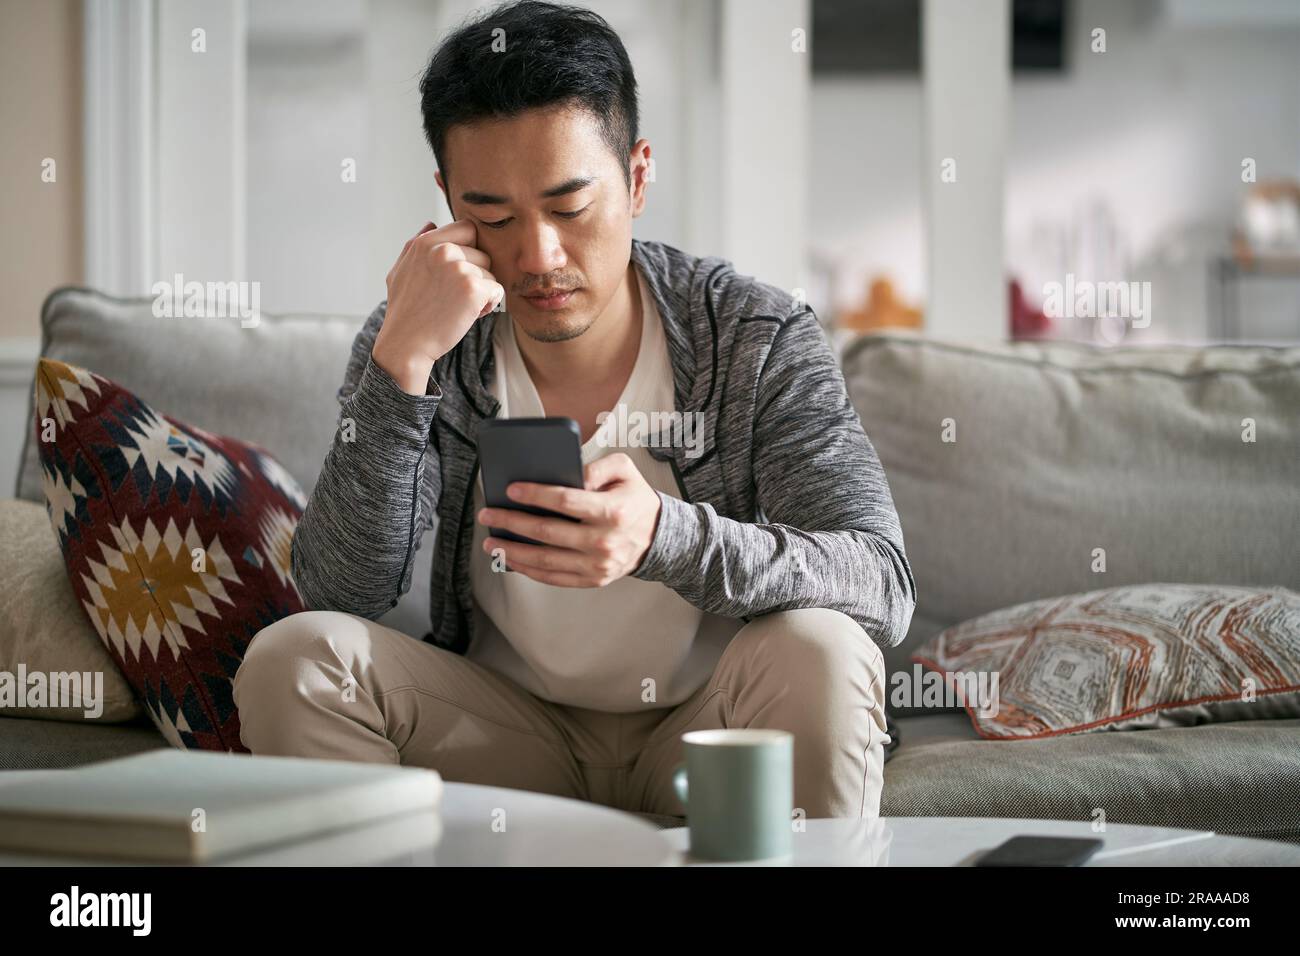 young asian man sitting on couch at home looking at cellphone looking serious Stock Photo